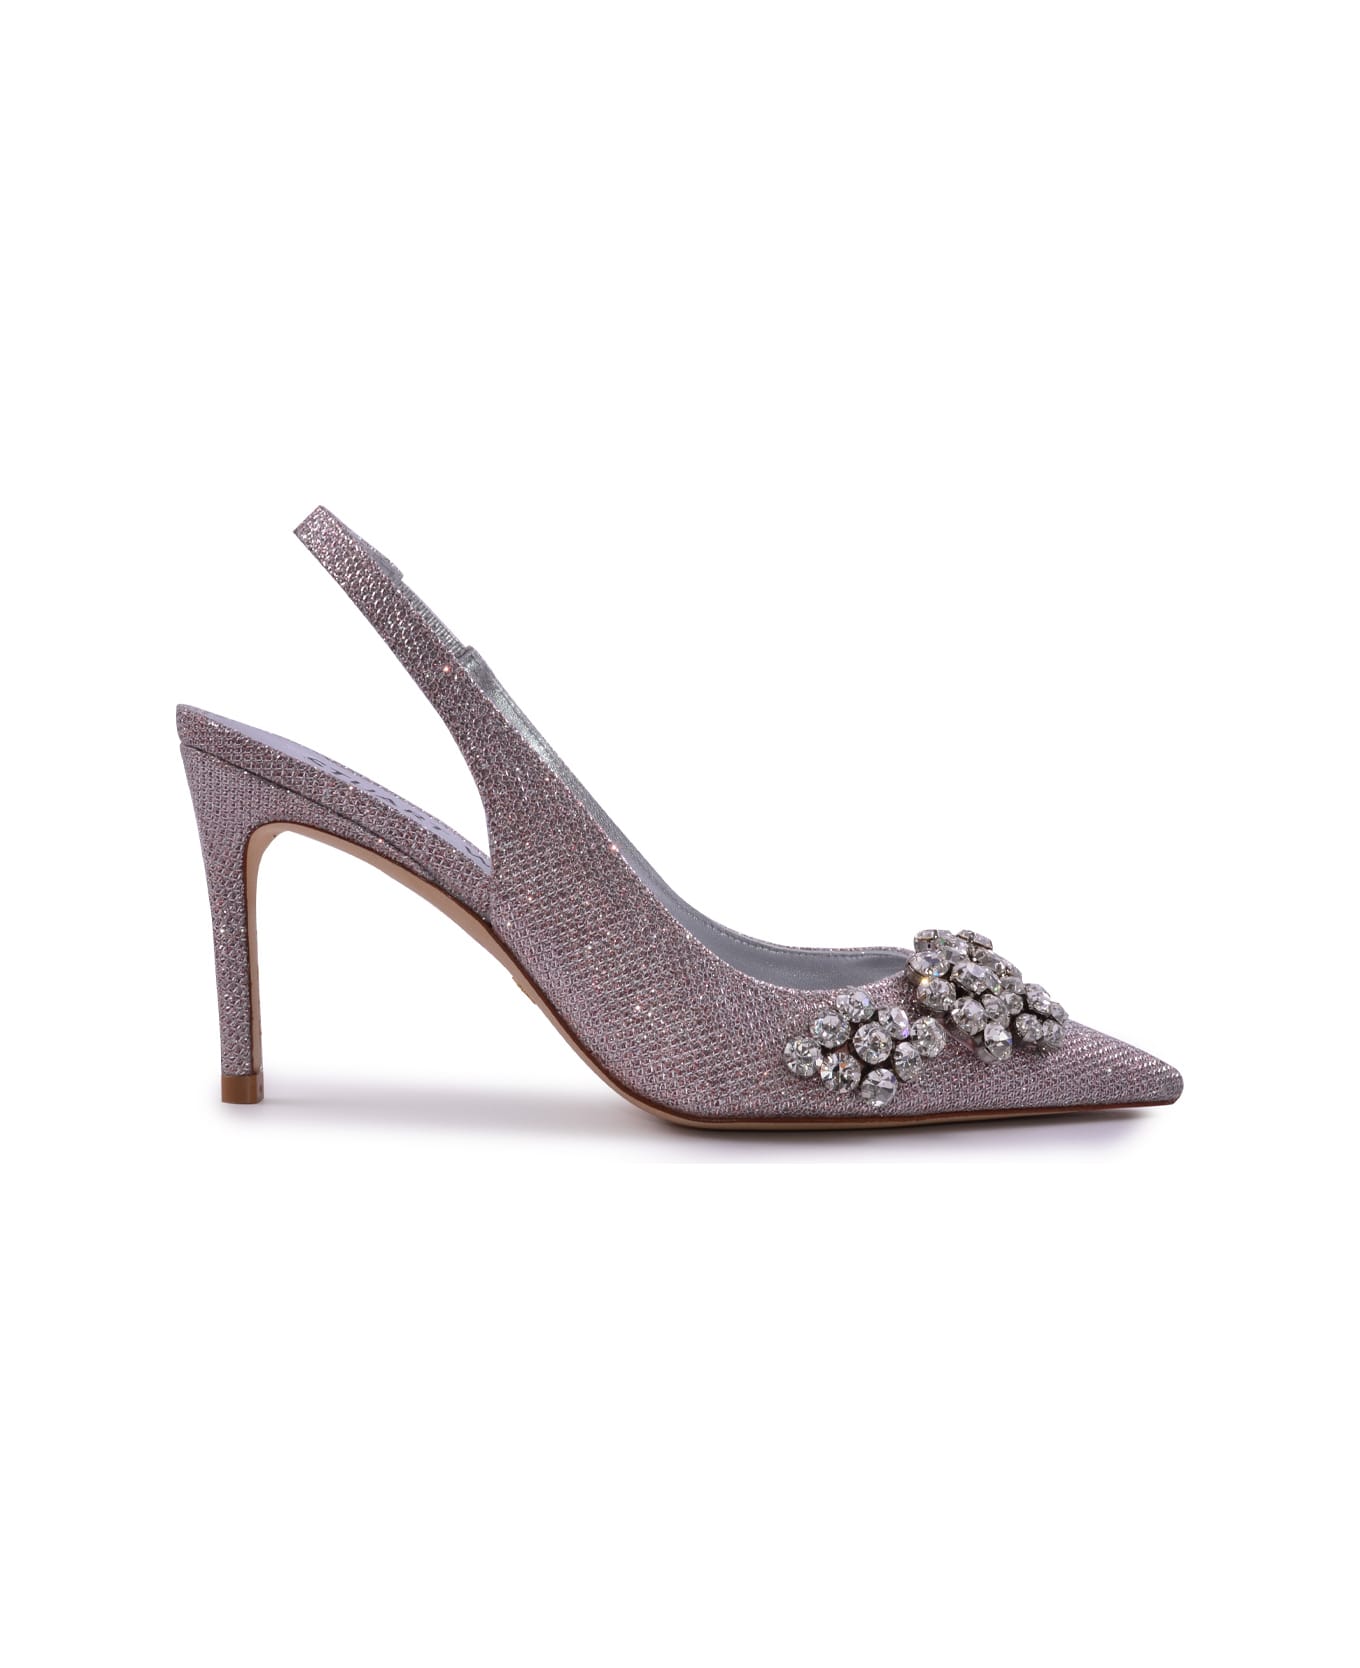 Stuart Weitzman Shoes With Heels And Crystals - Pink